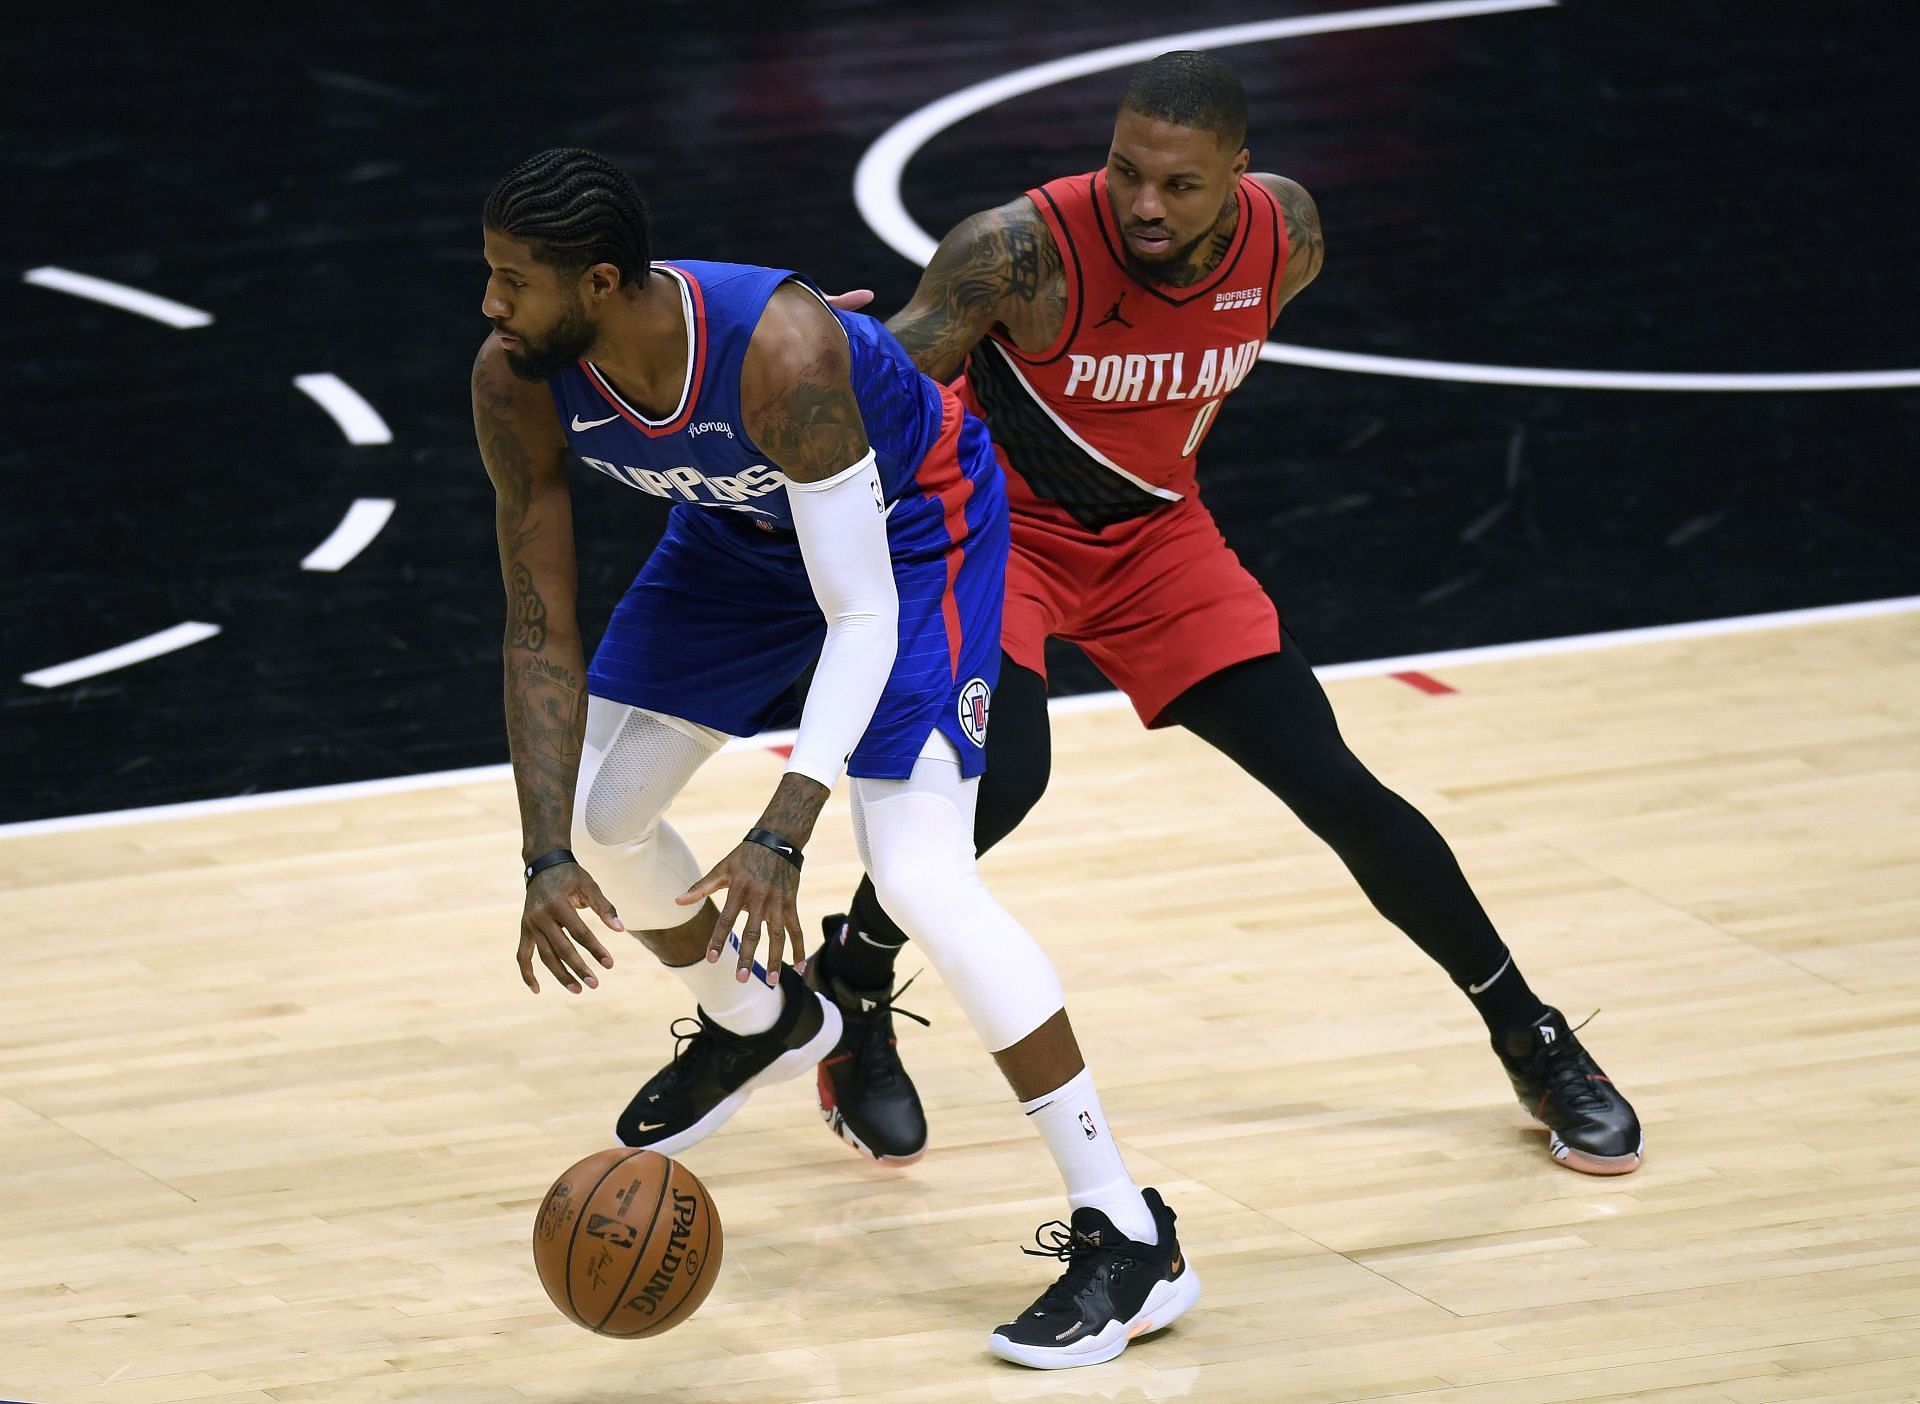 The LA Clippers will play host to the Portland Trail Blazers on Monday evening